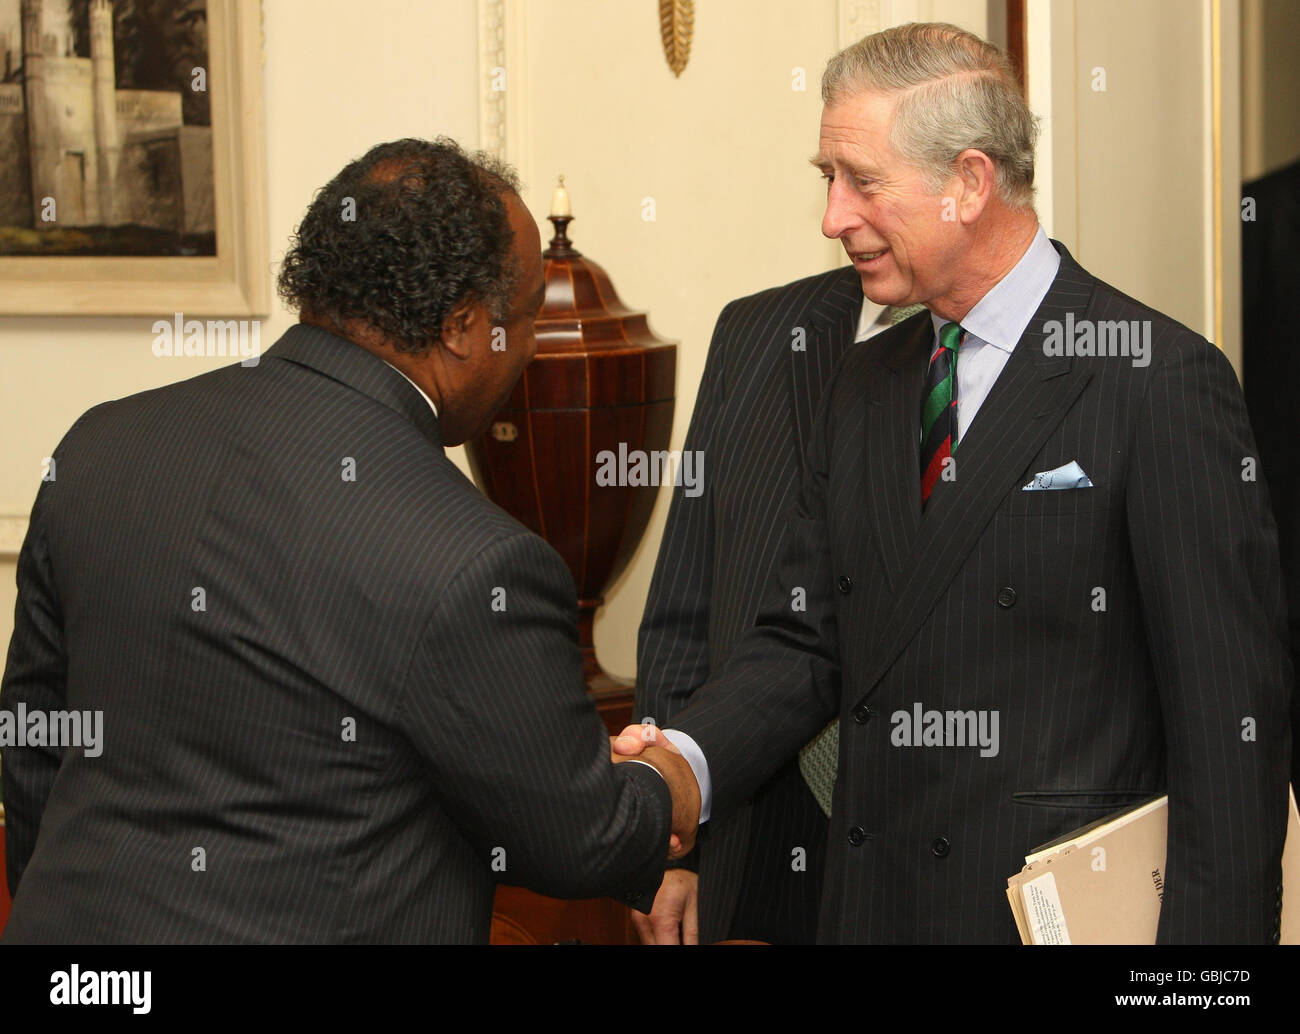 The Prince of Wales meets Minister Ali Bongo Ondimba, Minister of Defence for Gabon, at a meeting of the African Task Force Advisory Board at Clarence House in London. Stock Photo